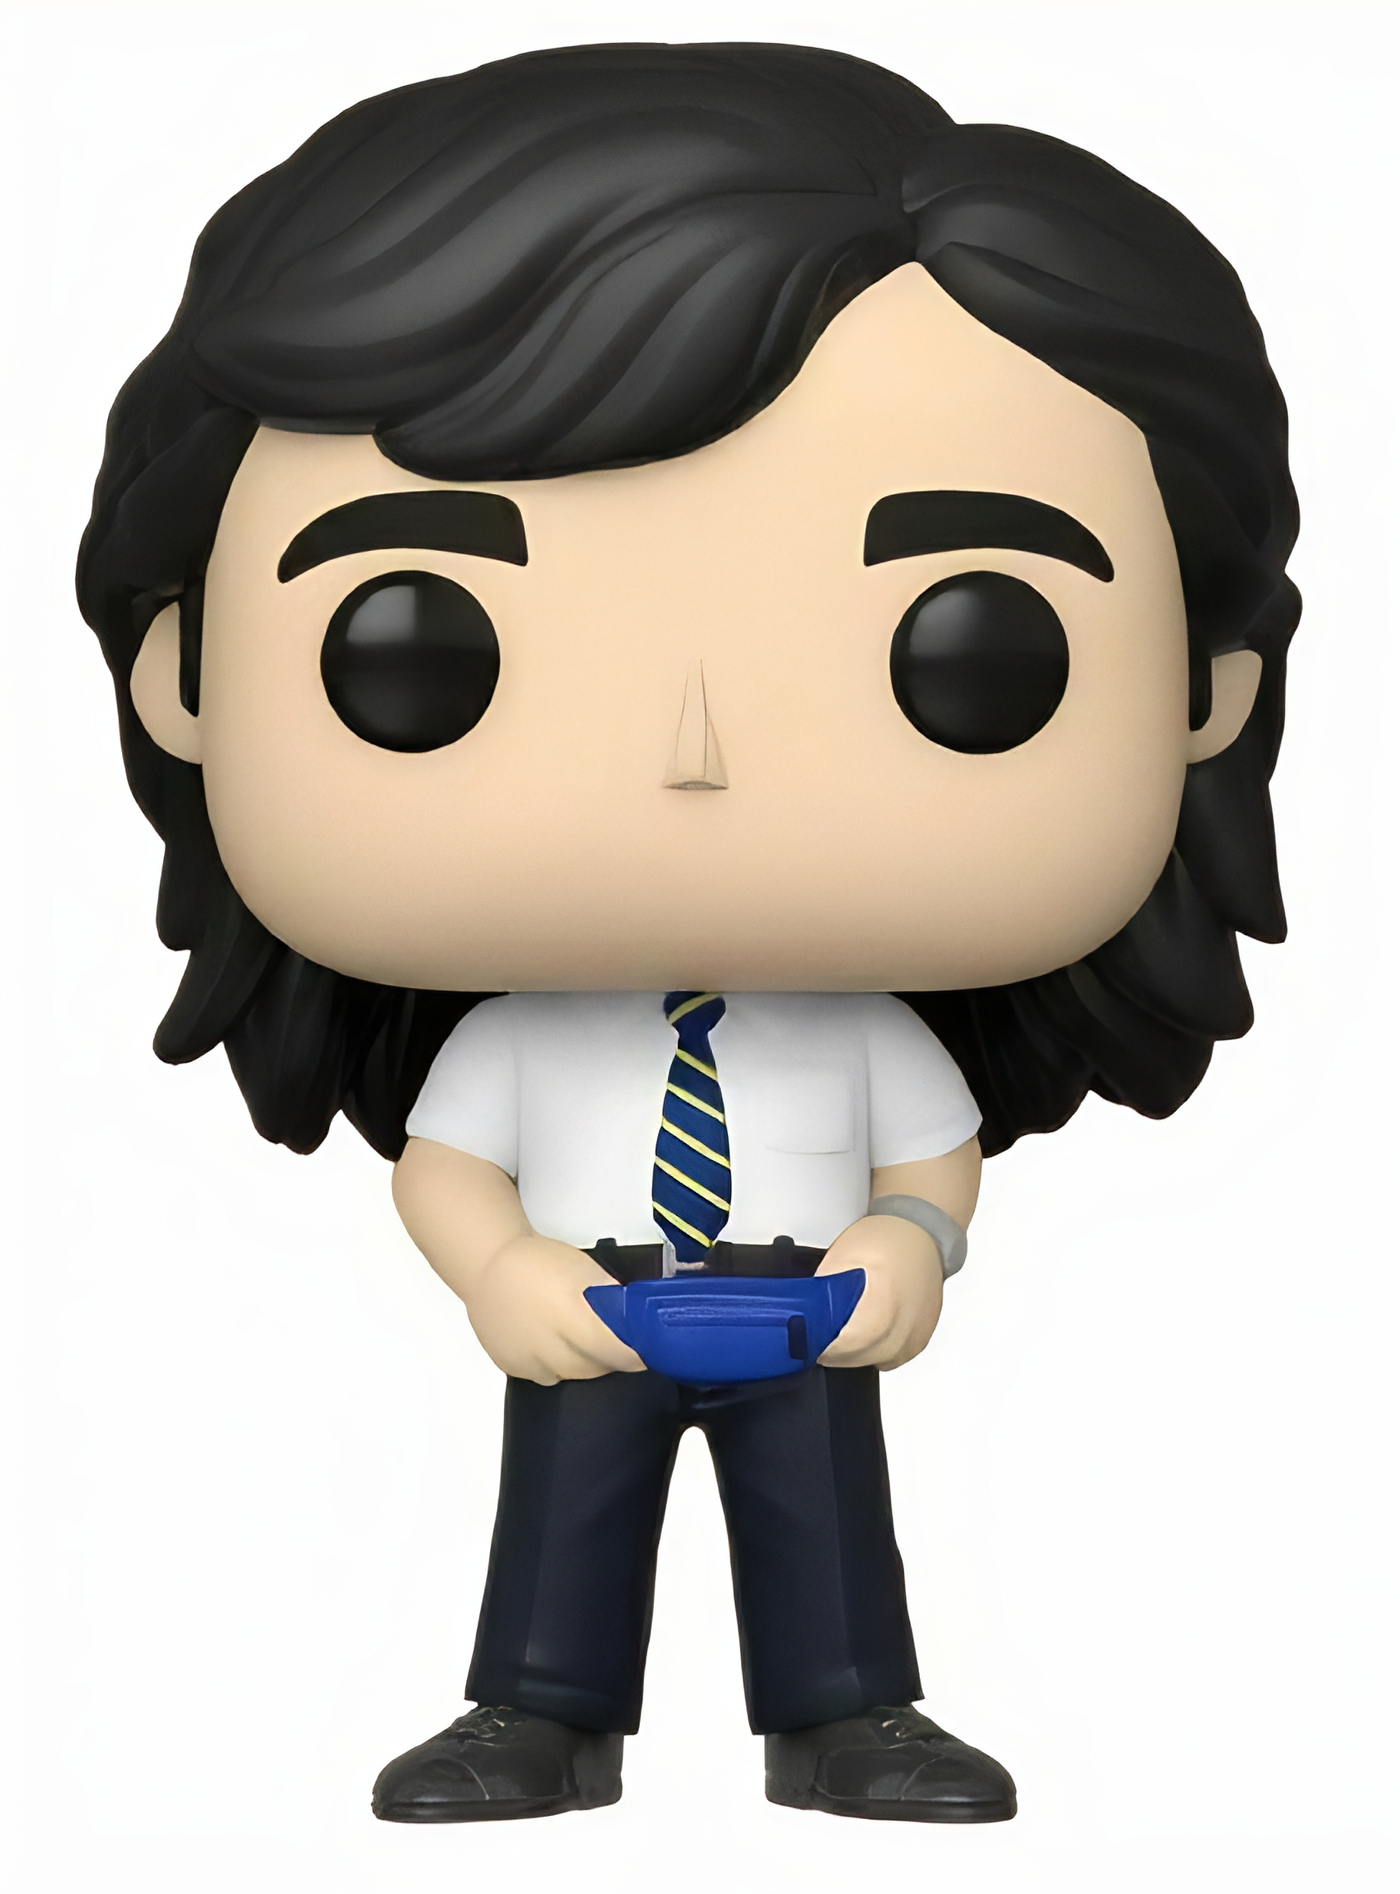 POP! Television: 1176 The Office, Michael Scott Exclusive